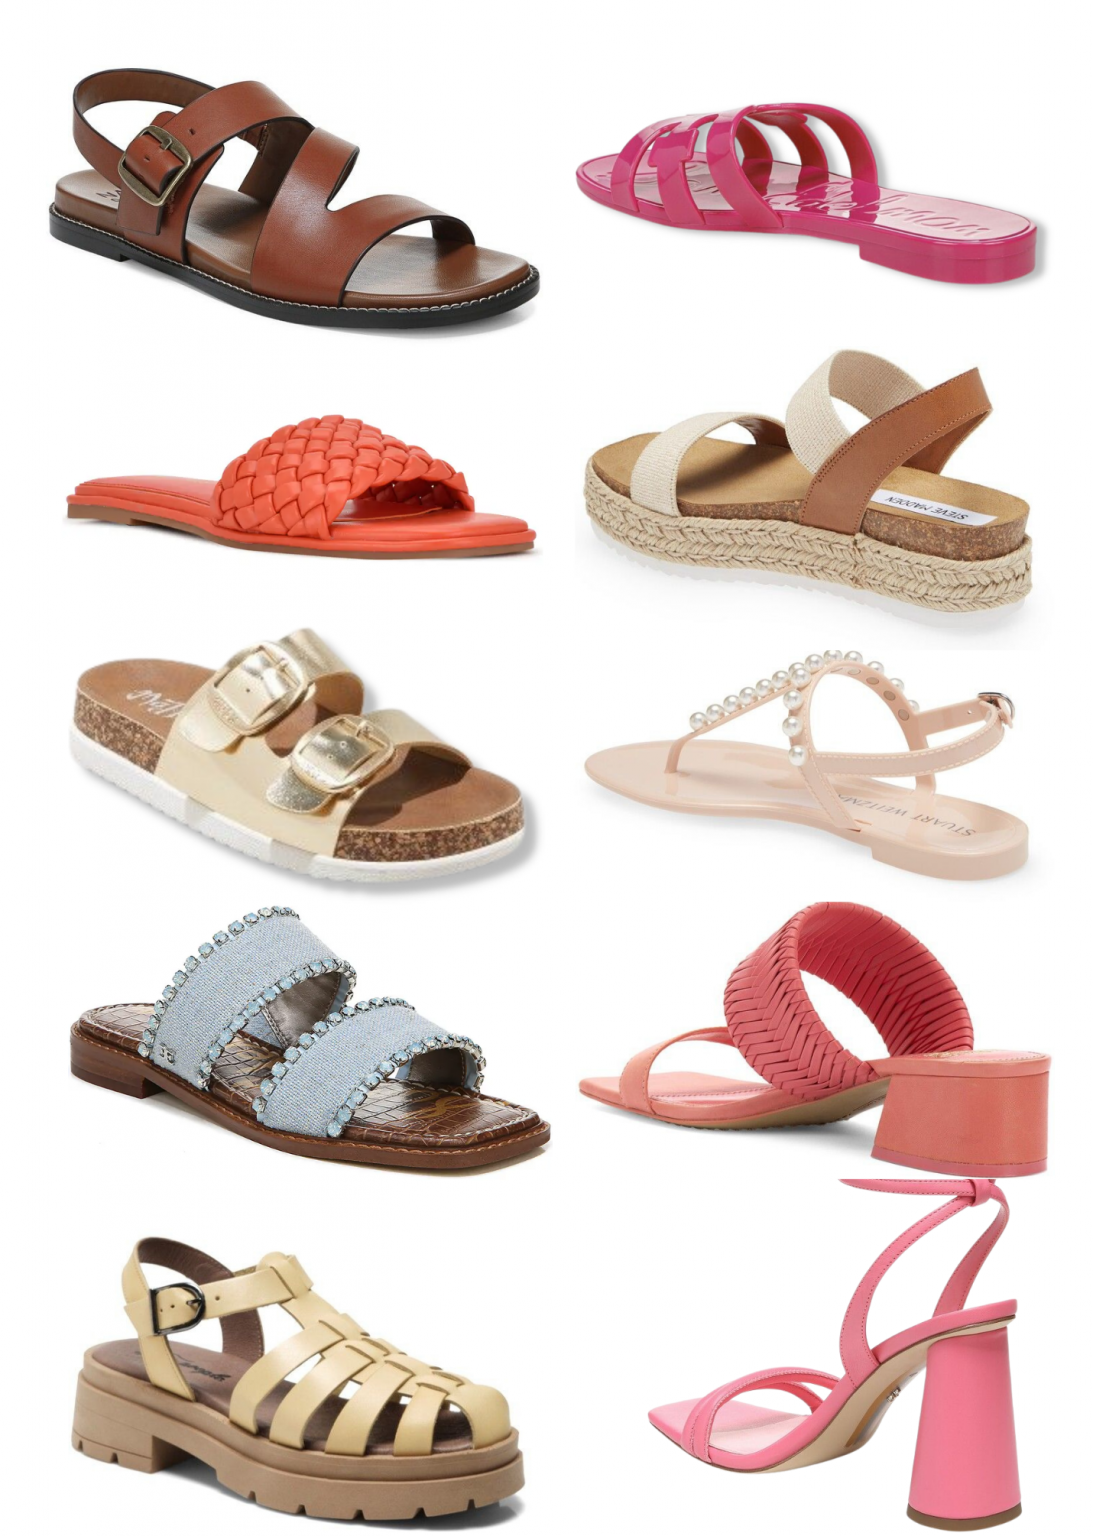 2022 Spring Sandals for Women - Dressed for My Day